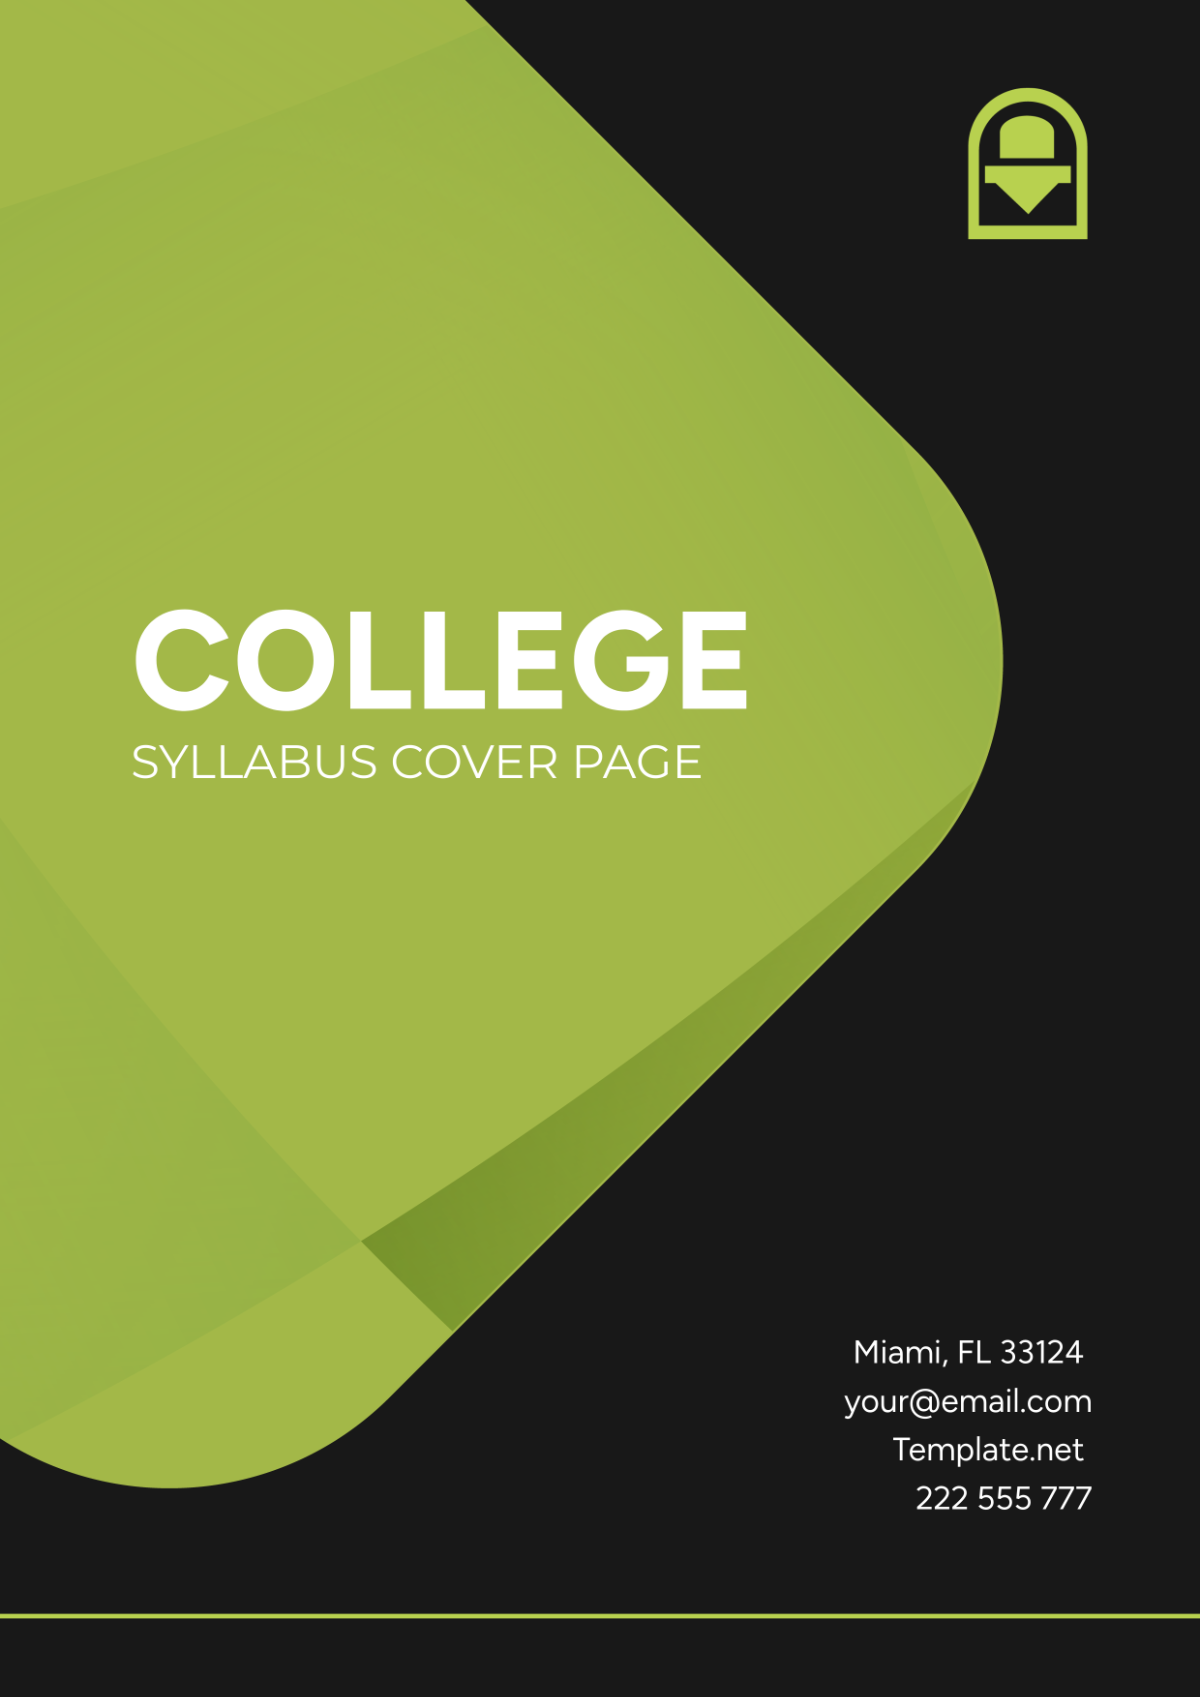 College Syllabus Cover Page